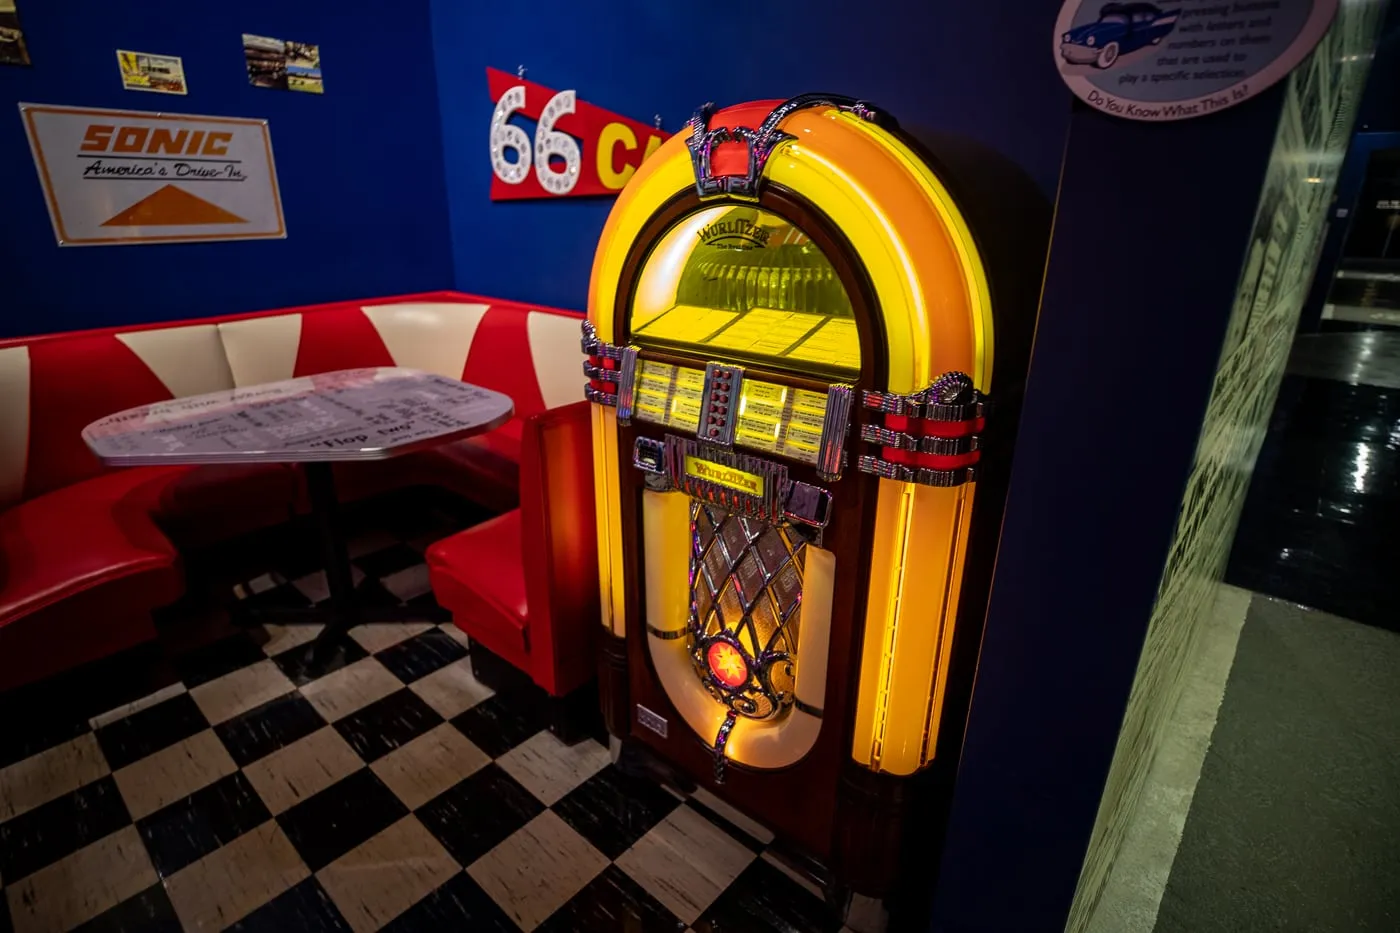 Vintage diner and jukebox at the Oklahoma Route 66 Museum in Clinton, Oklahoma